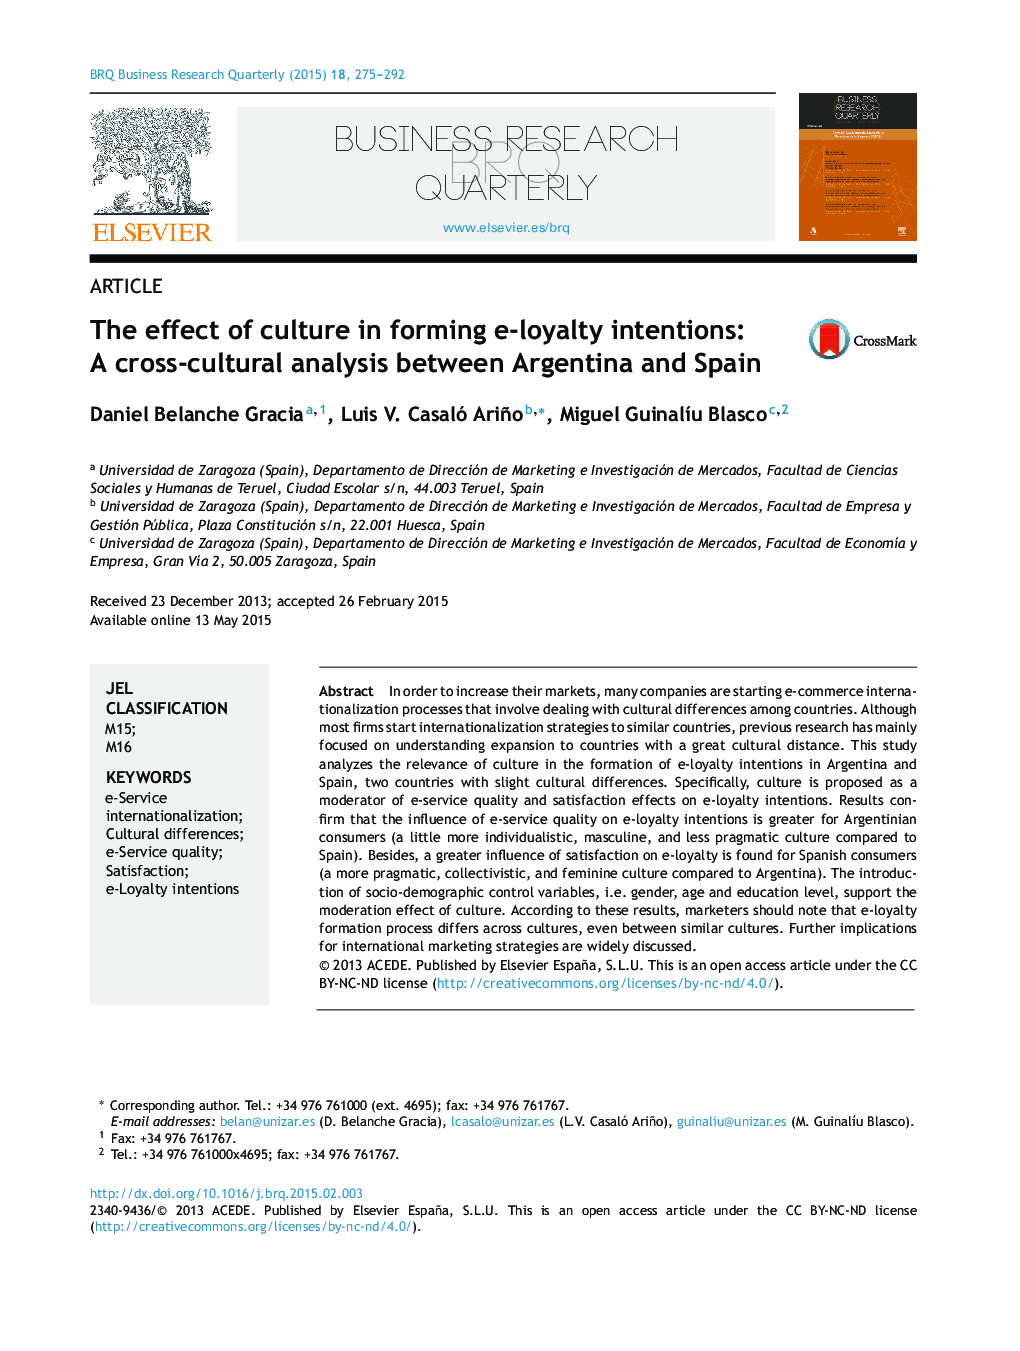 The effect of culture in forming e-loyalty intentions: A cross-cultural analysis between Argentina and Spain